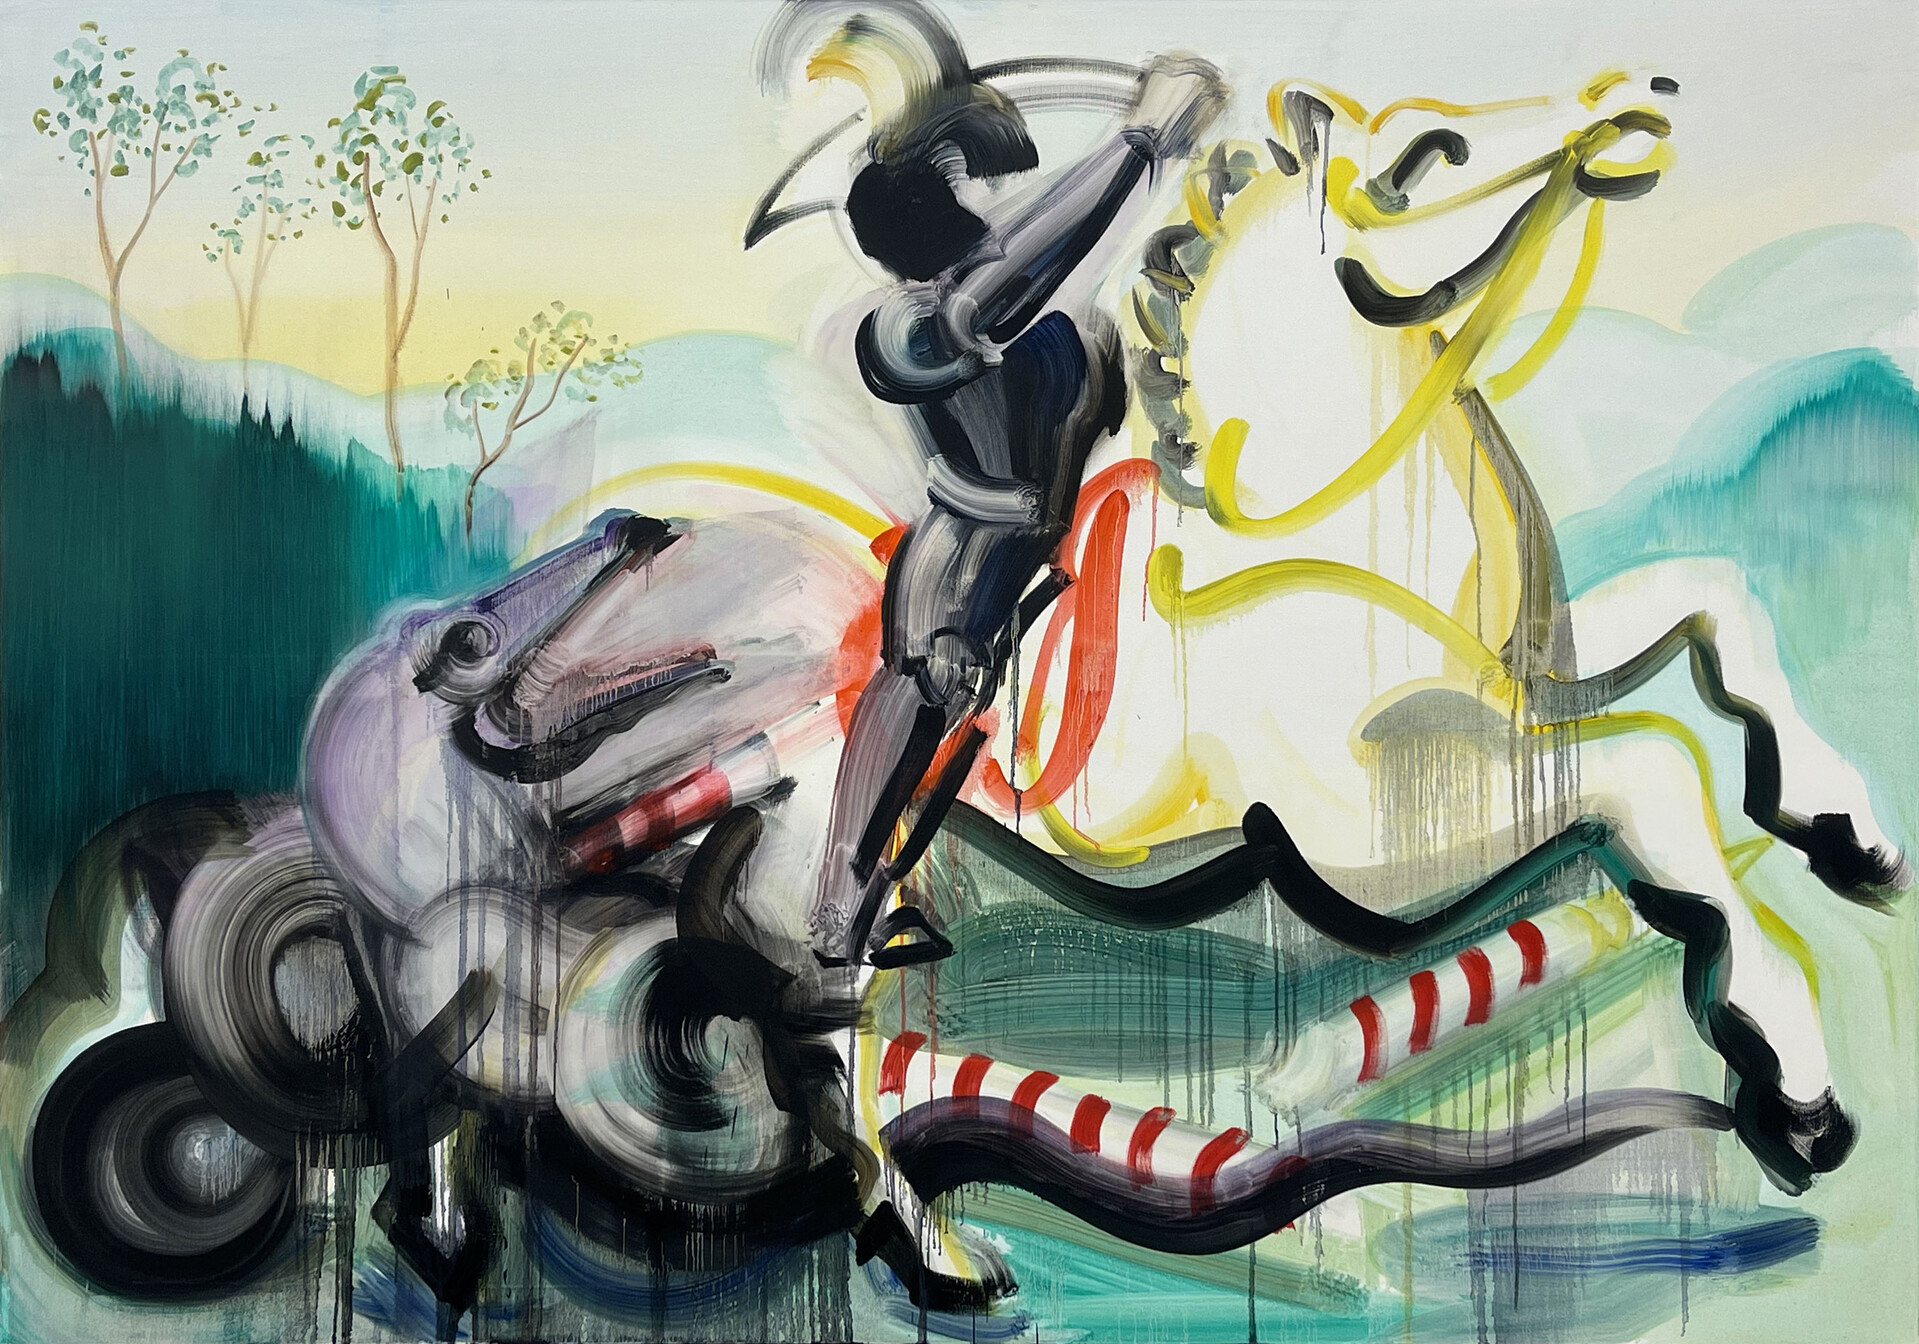 Saint George and the Dragon - 140 x 200 cm, oil on canvas, 2021